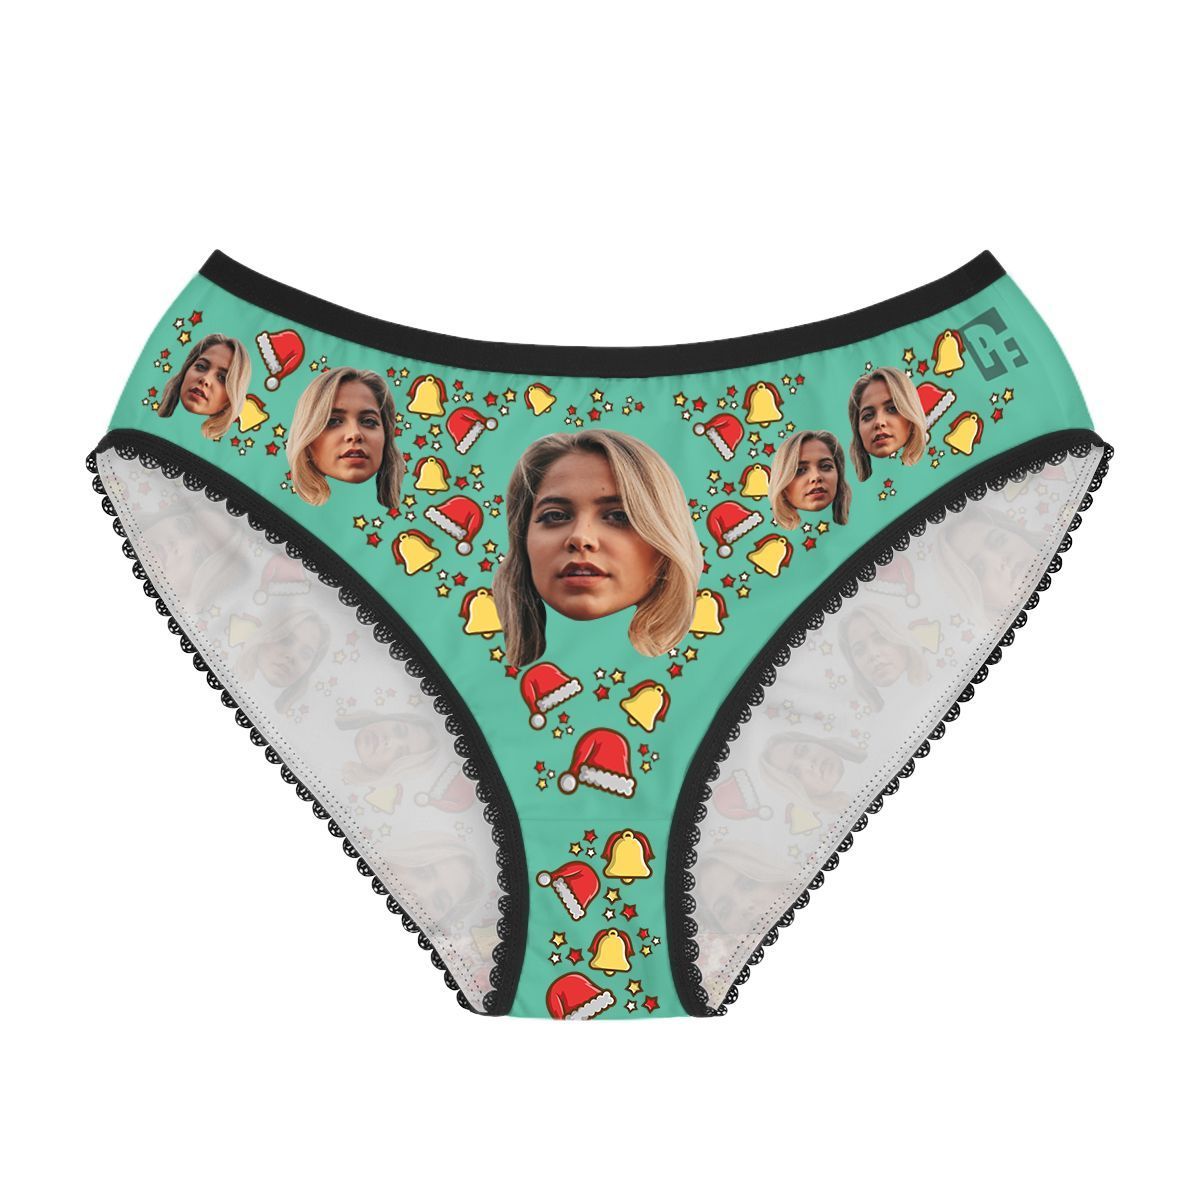 Mint Santa's hat women's underwear briefs personalized with photo printed on them